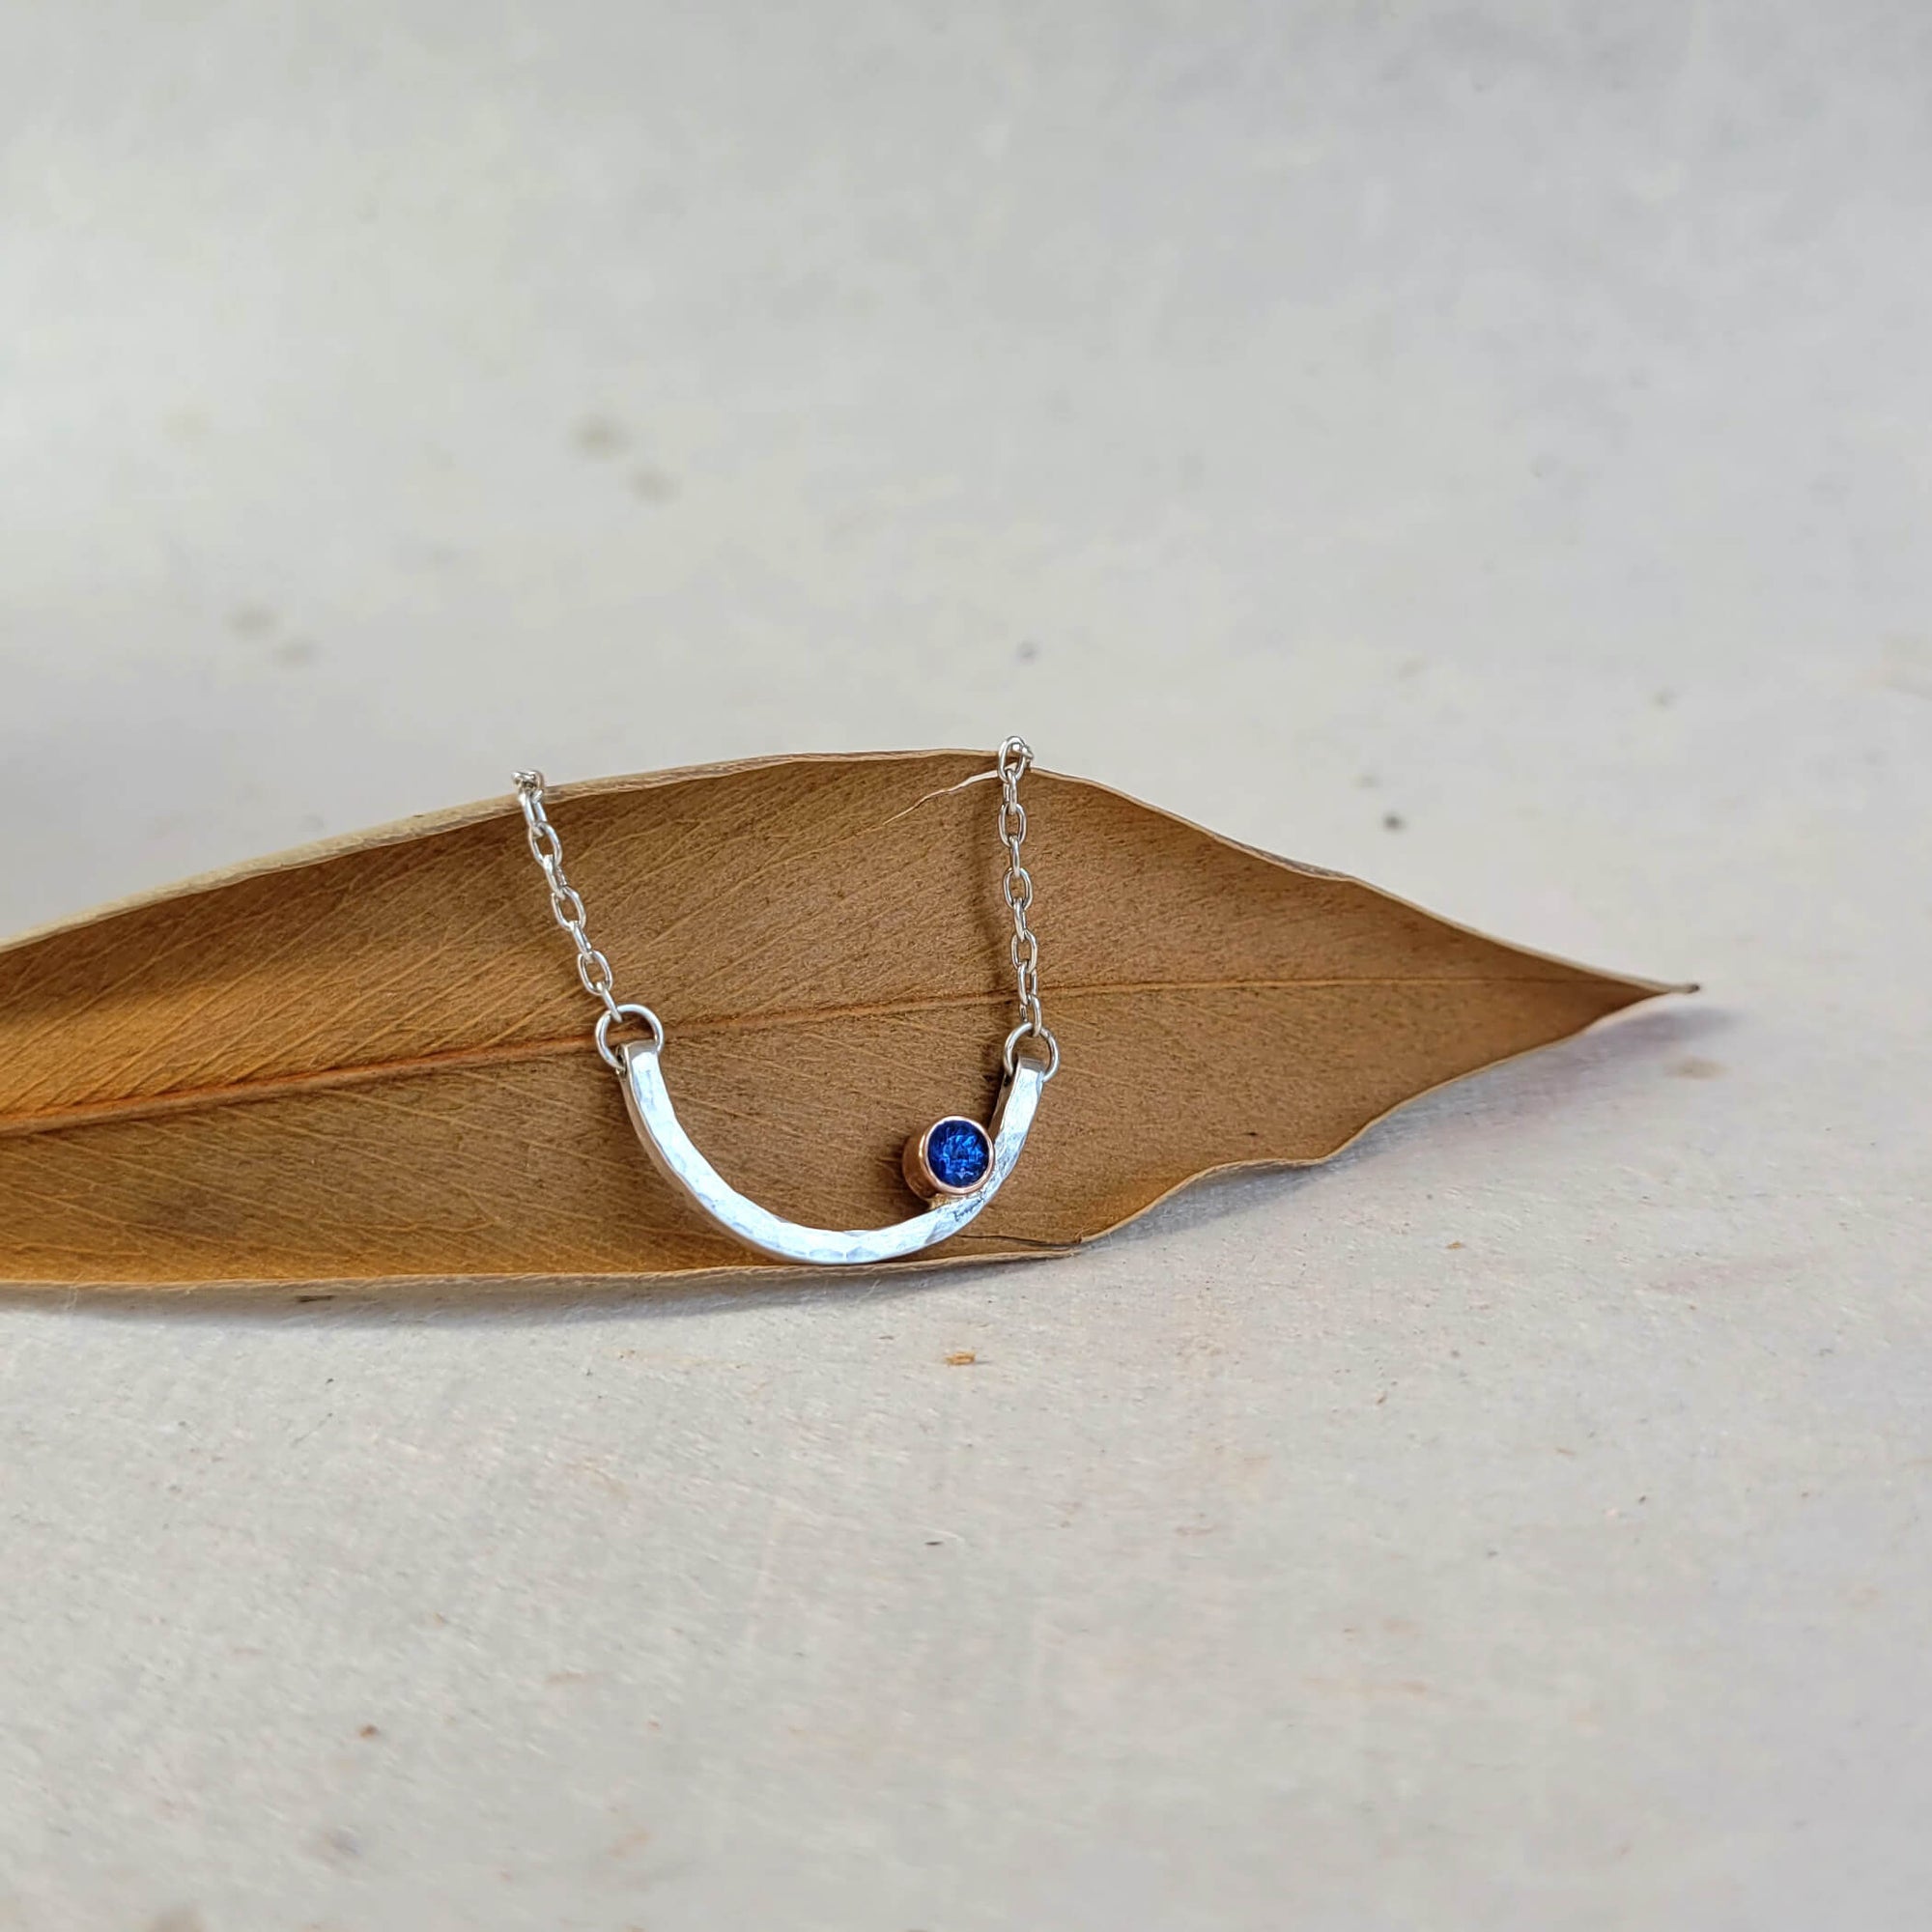 Hammered sterling necklace with blue sapphire accent bezel set in rose gold.